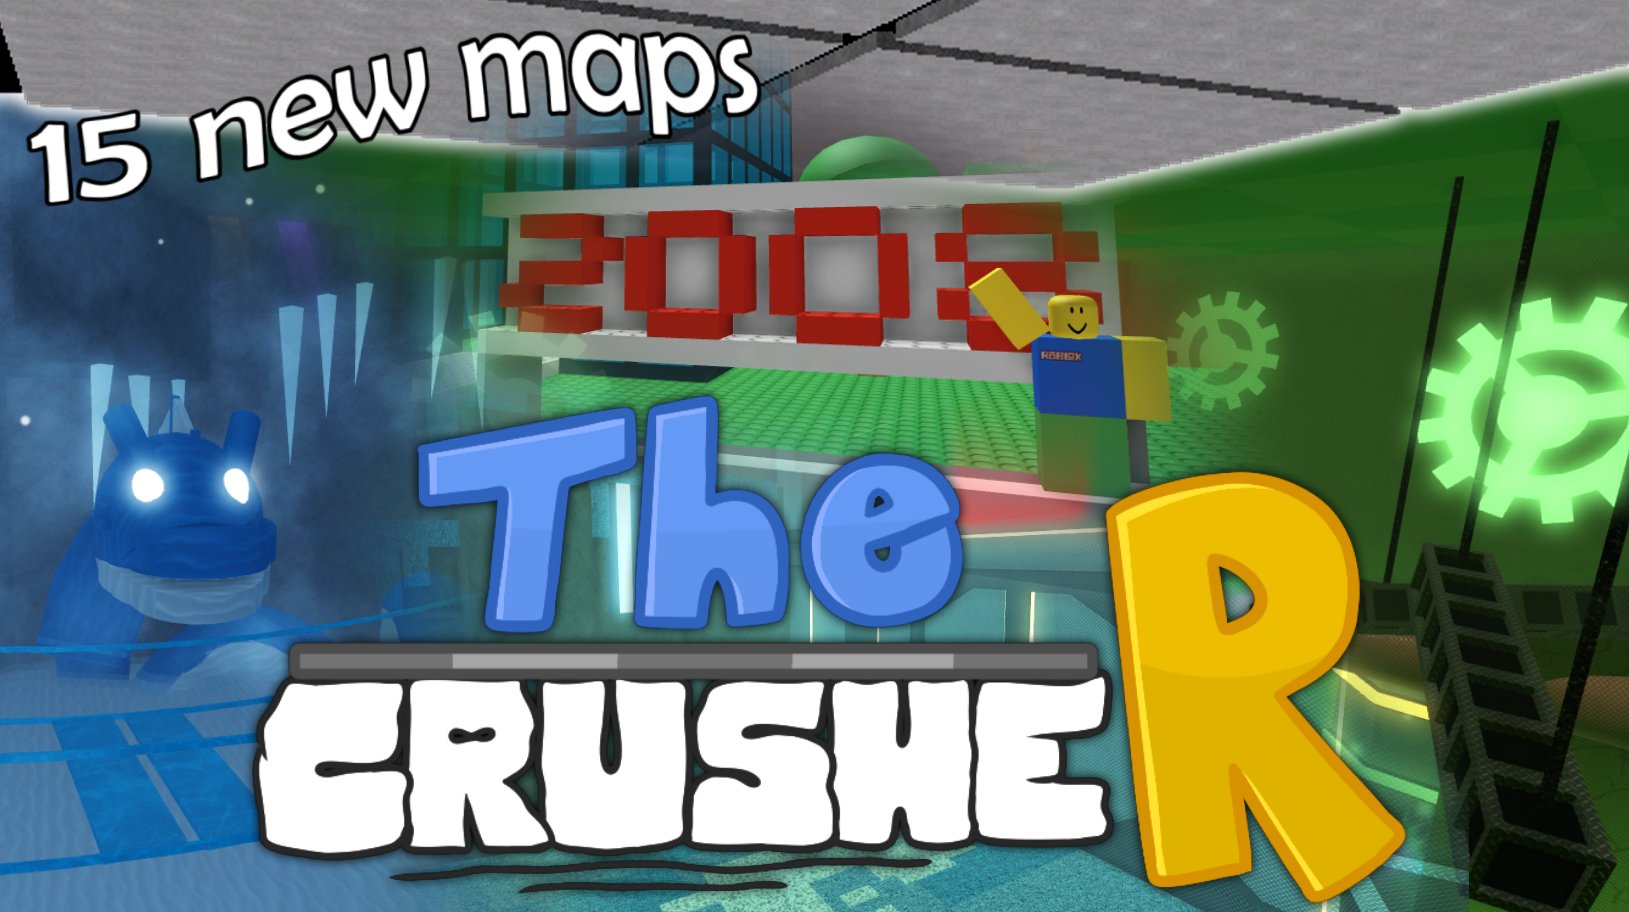 Typicaltype On Twitter 15 New Maps Have Been Added To The Crusher Use The Code Flatten To Get The Free Crushed Title Https T Co Fjwwpivv3f Https T Co Cqrawaygoy - code how to get the crushed title roblox the crusher